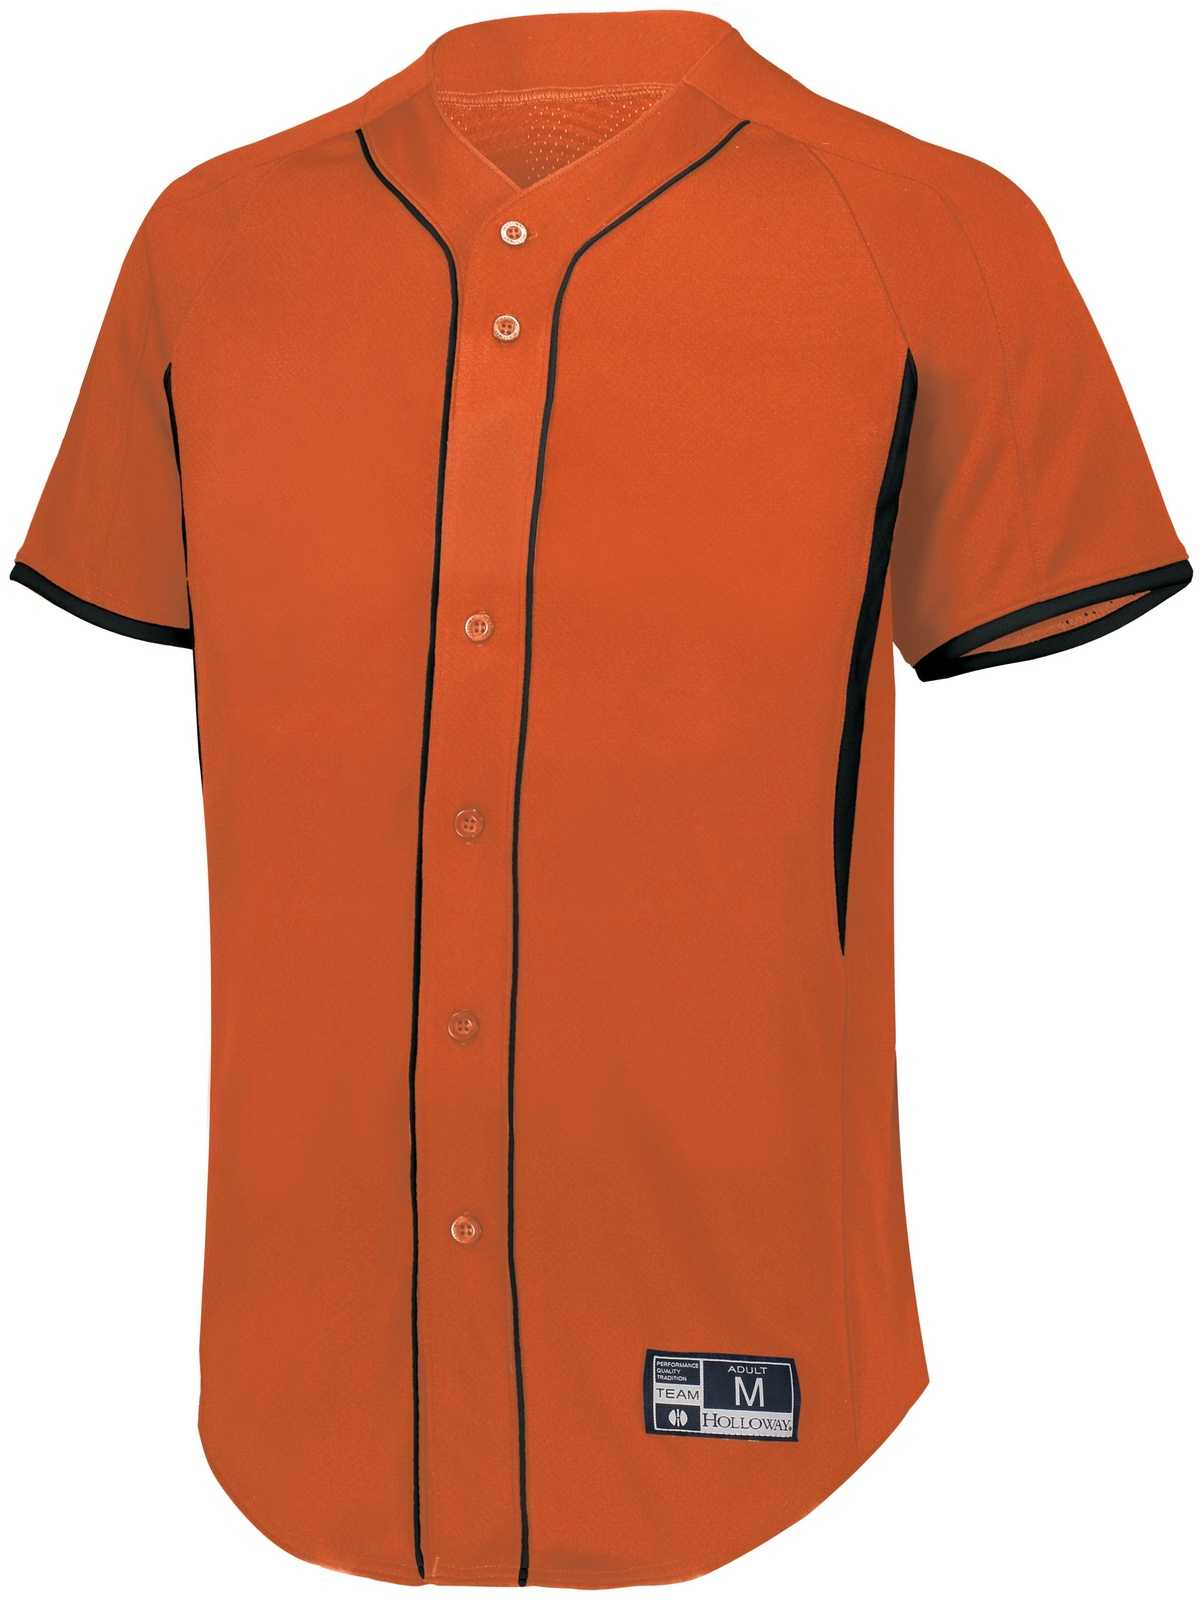 Holloway 221025 Game7 Full-Button Baseball Jersey - Orange Black - HIT a Double